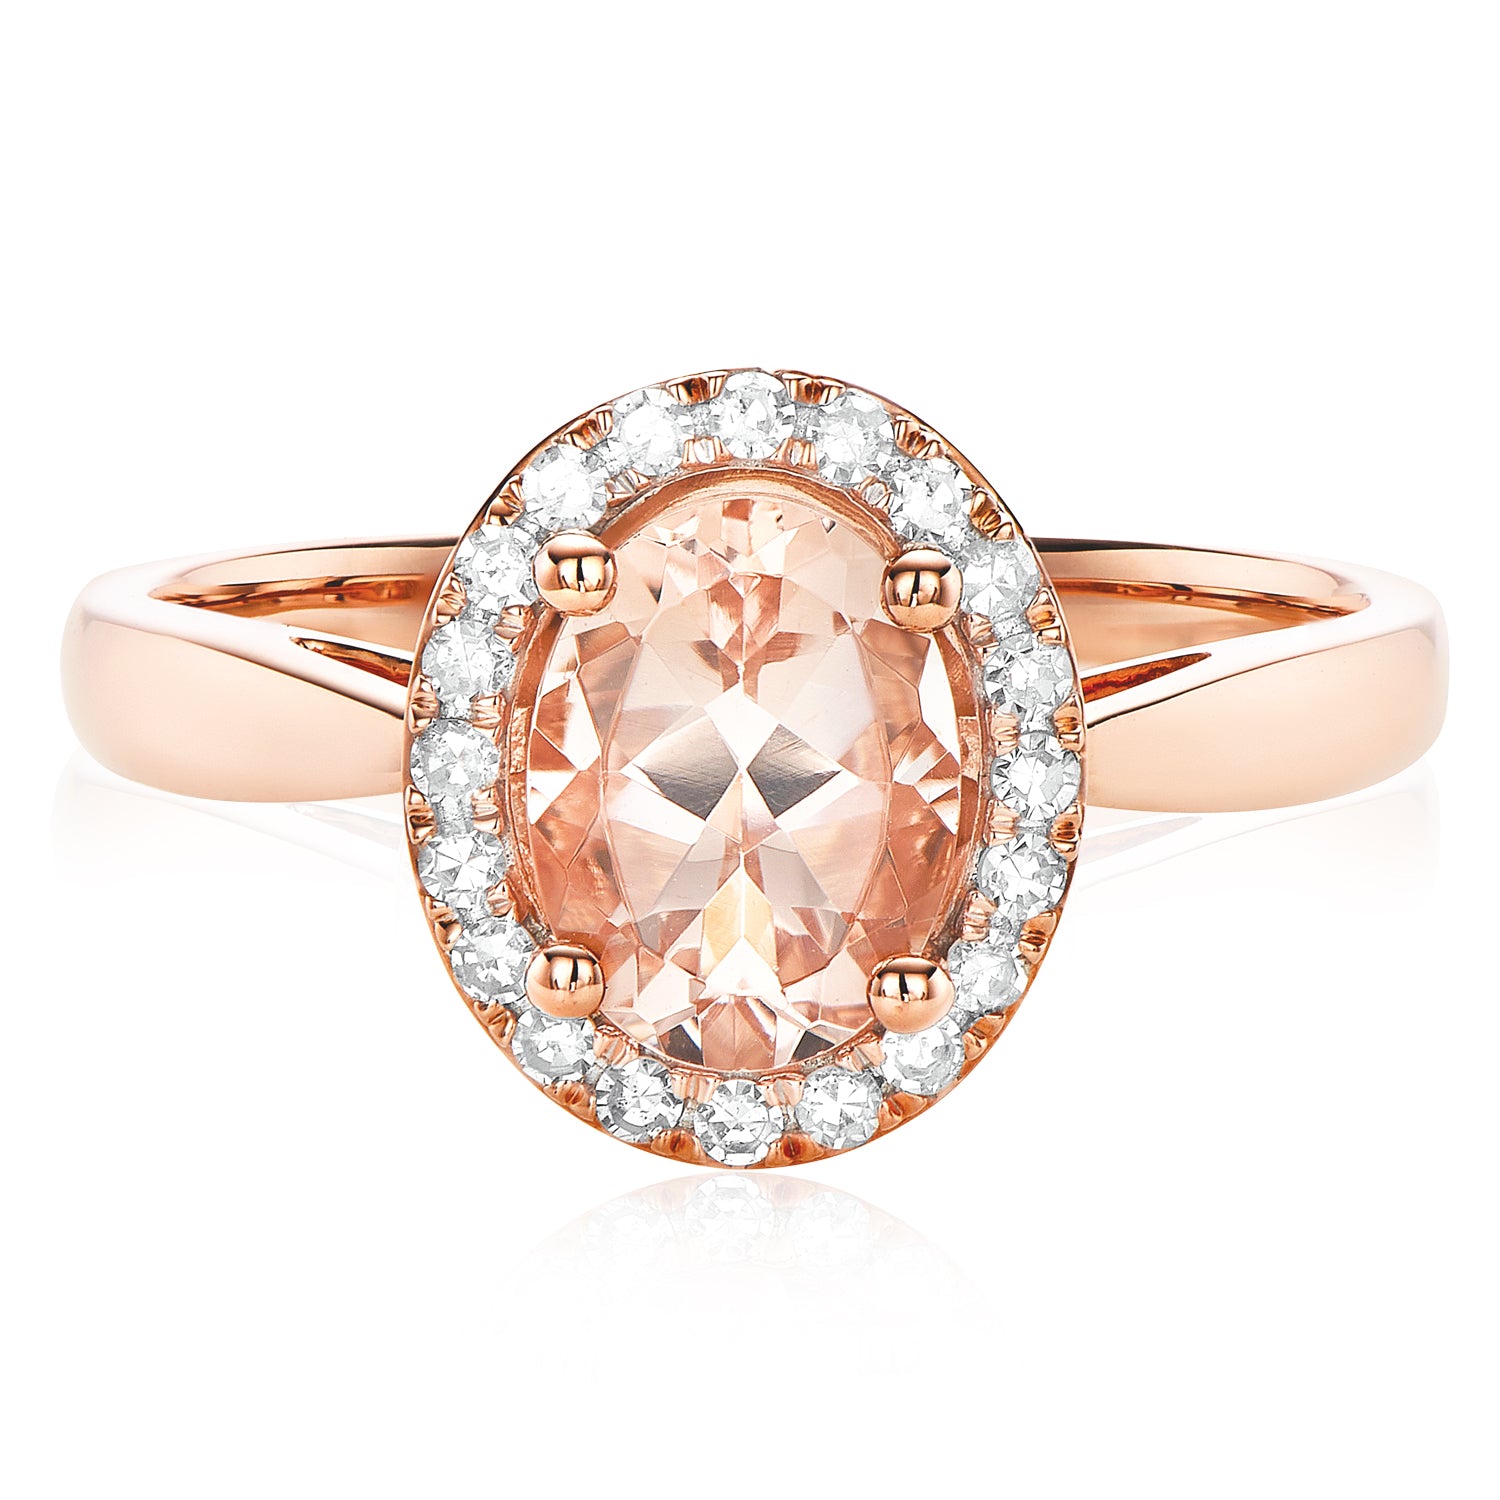 Pear Shape Morganite Ring in Platinum & Rose Gold | Exquisite Jewelry for  Every Occasion | FWCJ